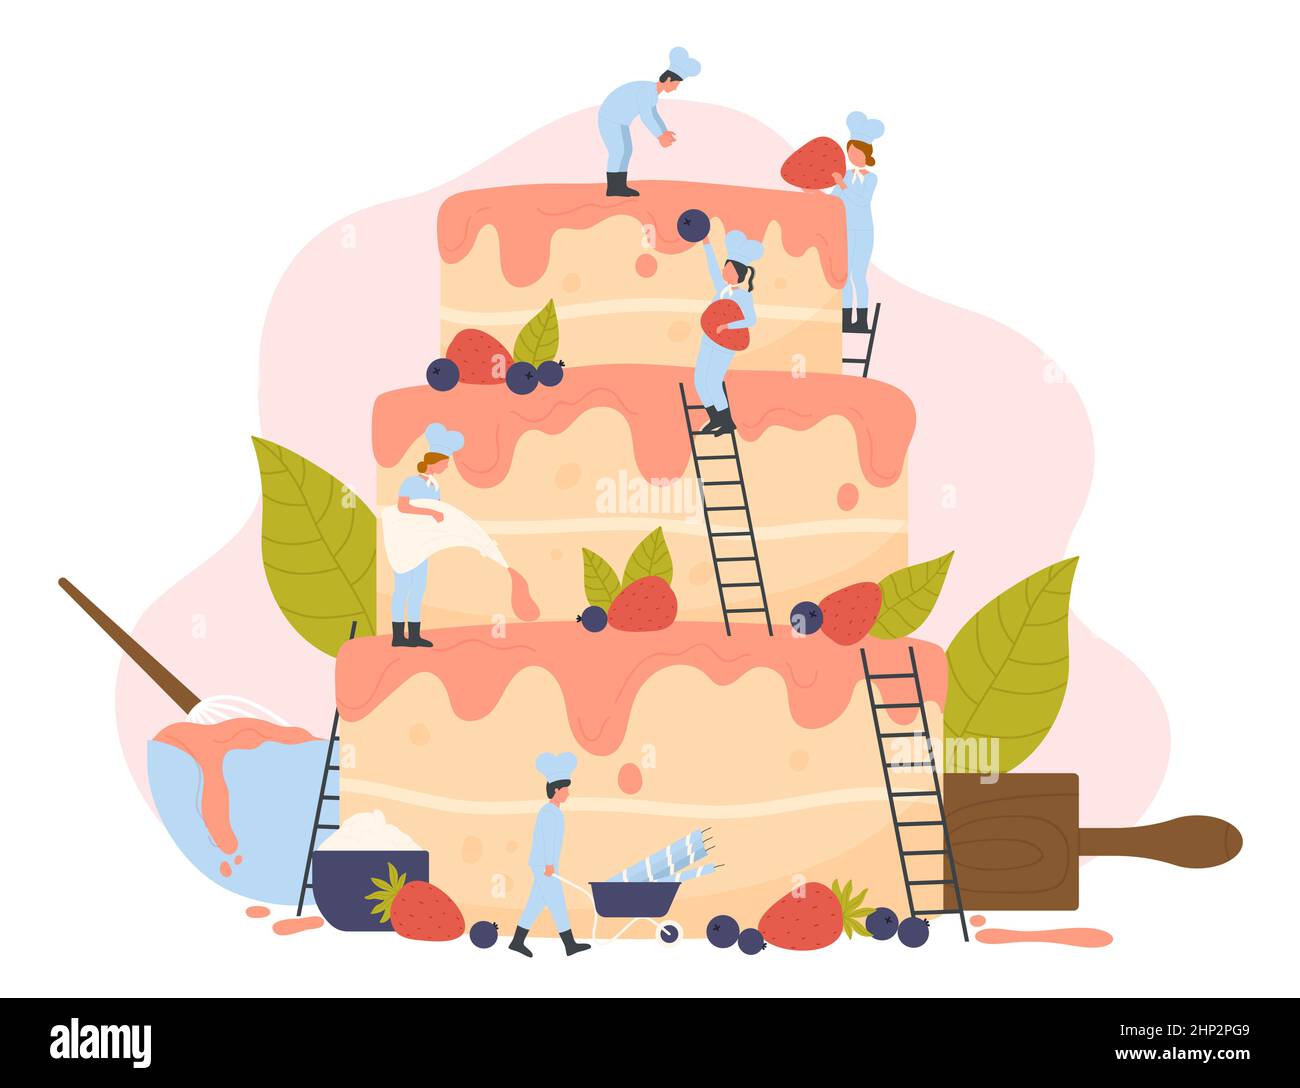 Cooking cake for holiday, birthday party. Team of tiny pastry chefs standing on ladders, making cream decoration, people holding strawberry and candle Stock Vector